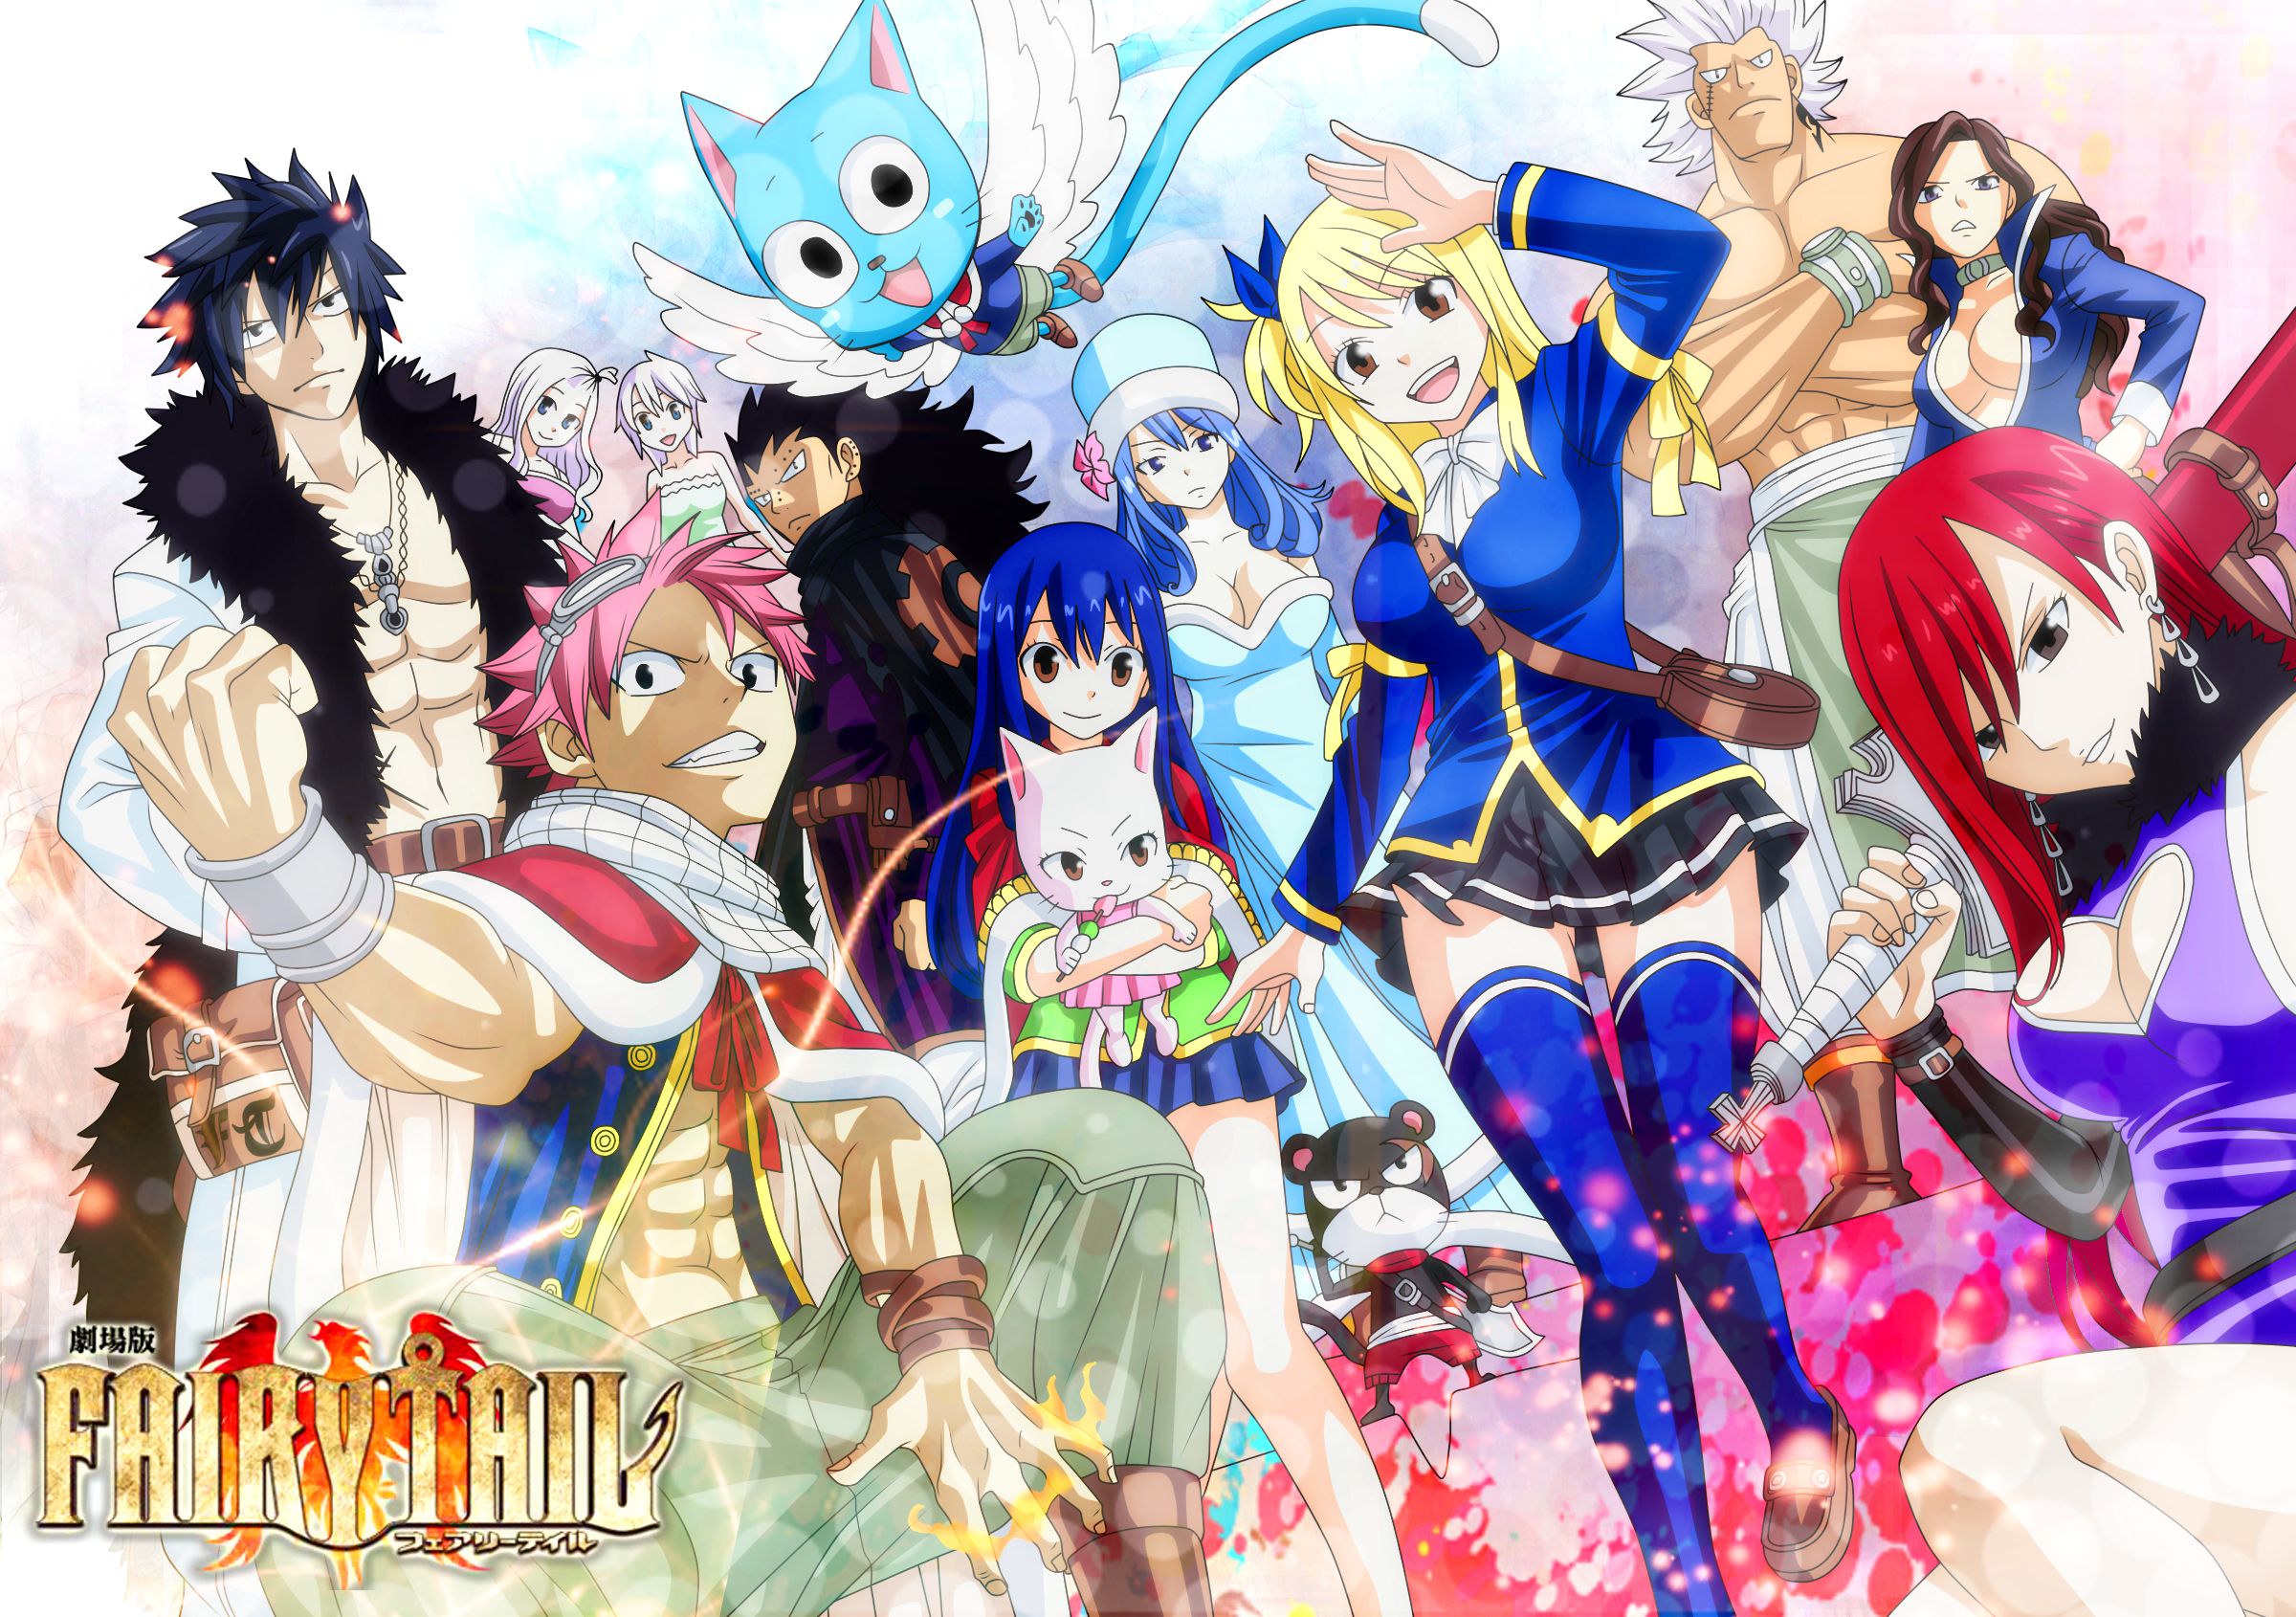 anime, fairy tail, cana alberona, charles (fairy tail), collar, earrings, elfman strauss, erza scarlet, gajeel redfox, gray fullbuster, happy (fairy tail), hat, juvia lockser, lisanna strauss, lucy heartfilia, mirajane strauss, natsu dragneel, panther lily (fairy tail), skirt, smile, sword, thigh highs, weapon, wendy marvell